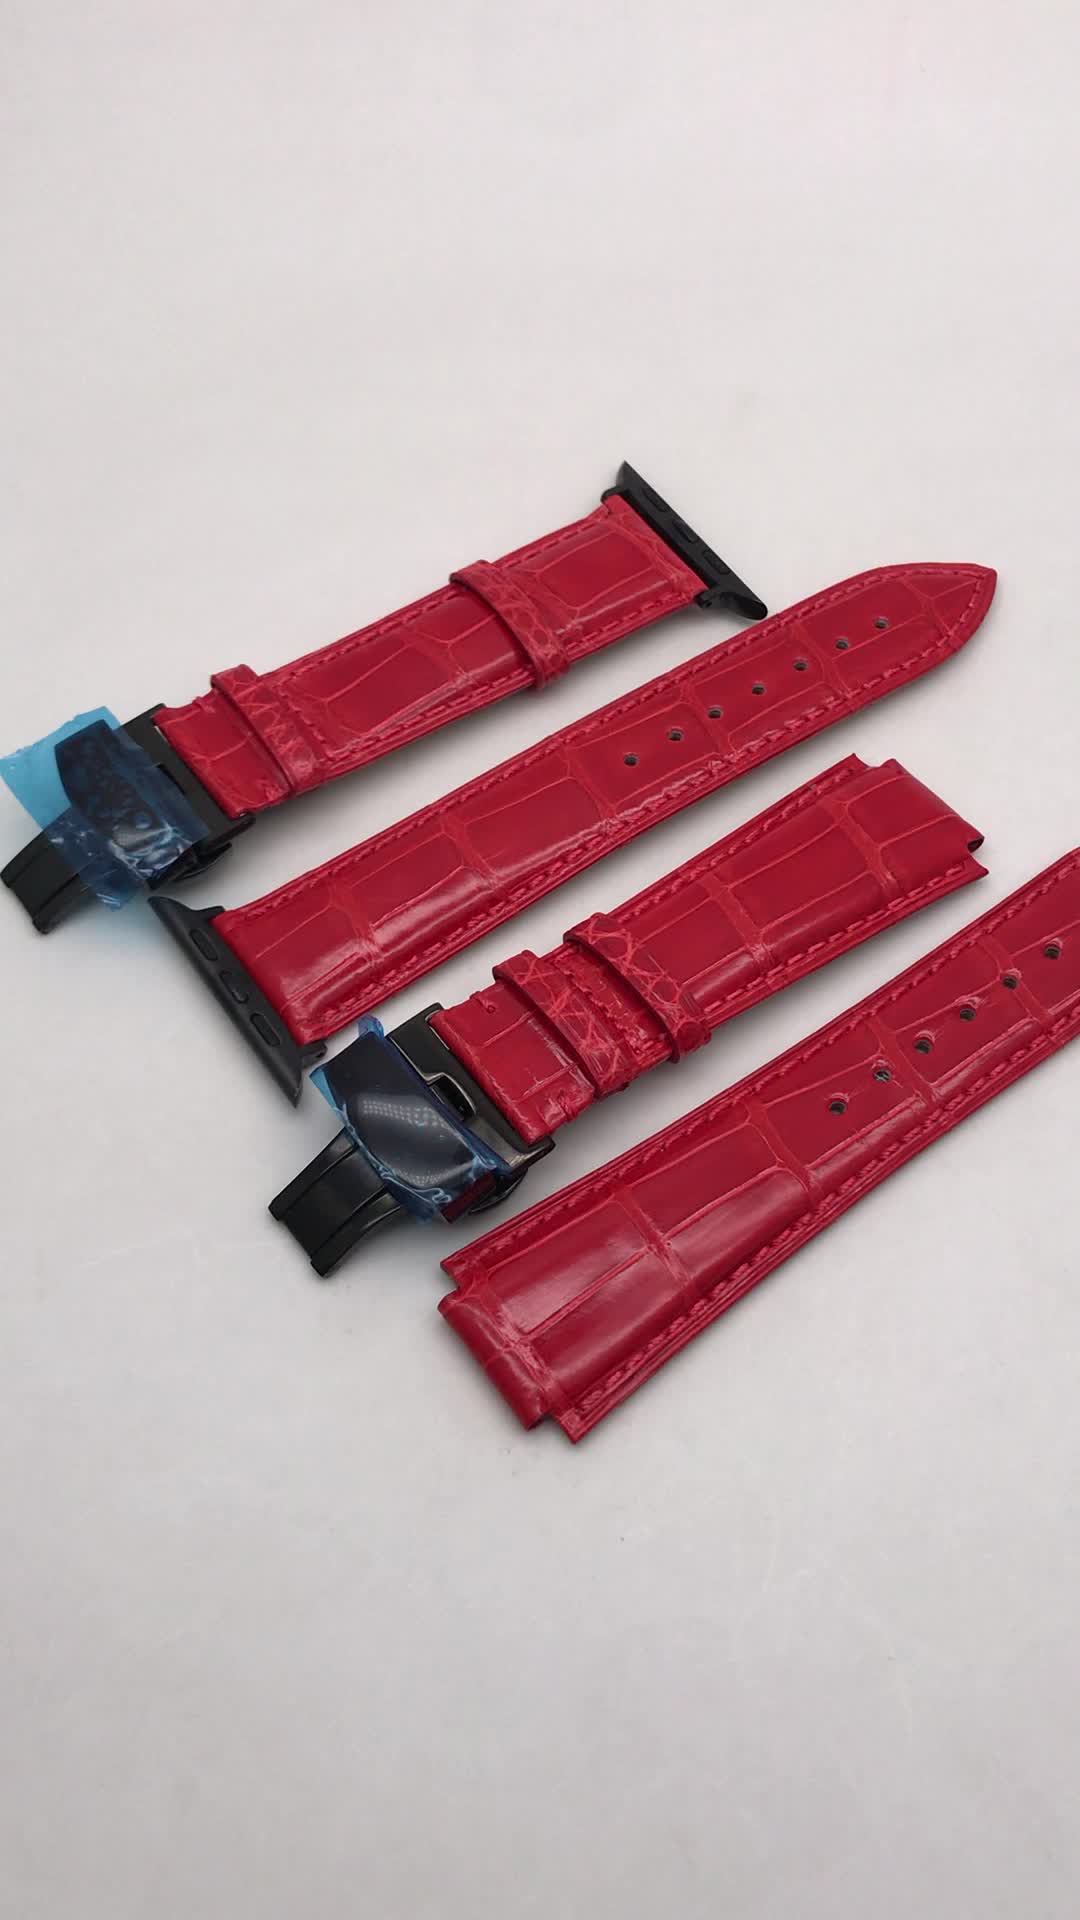 Odian Jewelry luxury Genuine Glossy Red Alligator Crocodile leather apples watch strap and customized leather watch strap